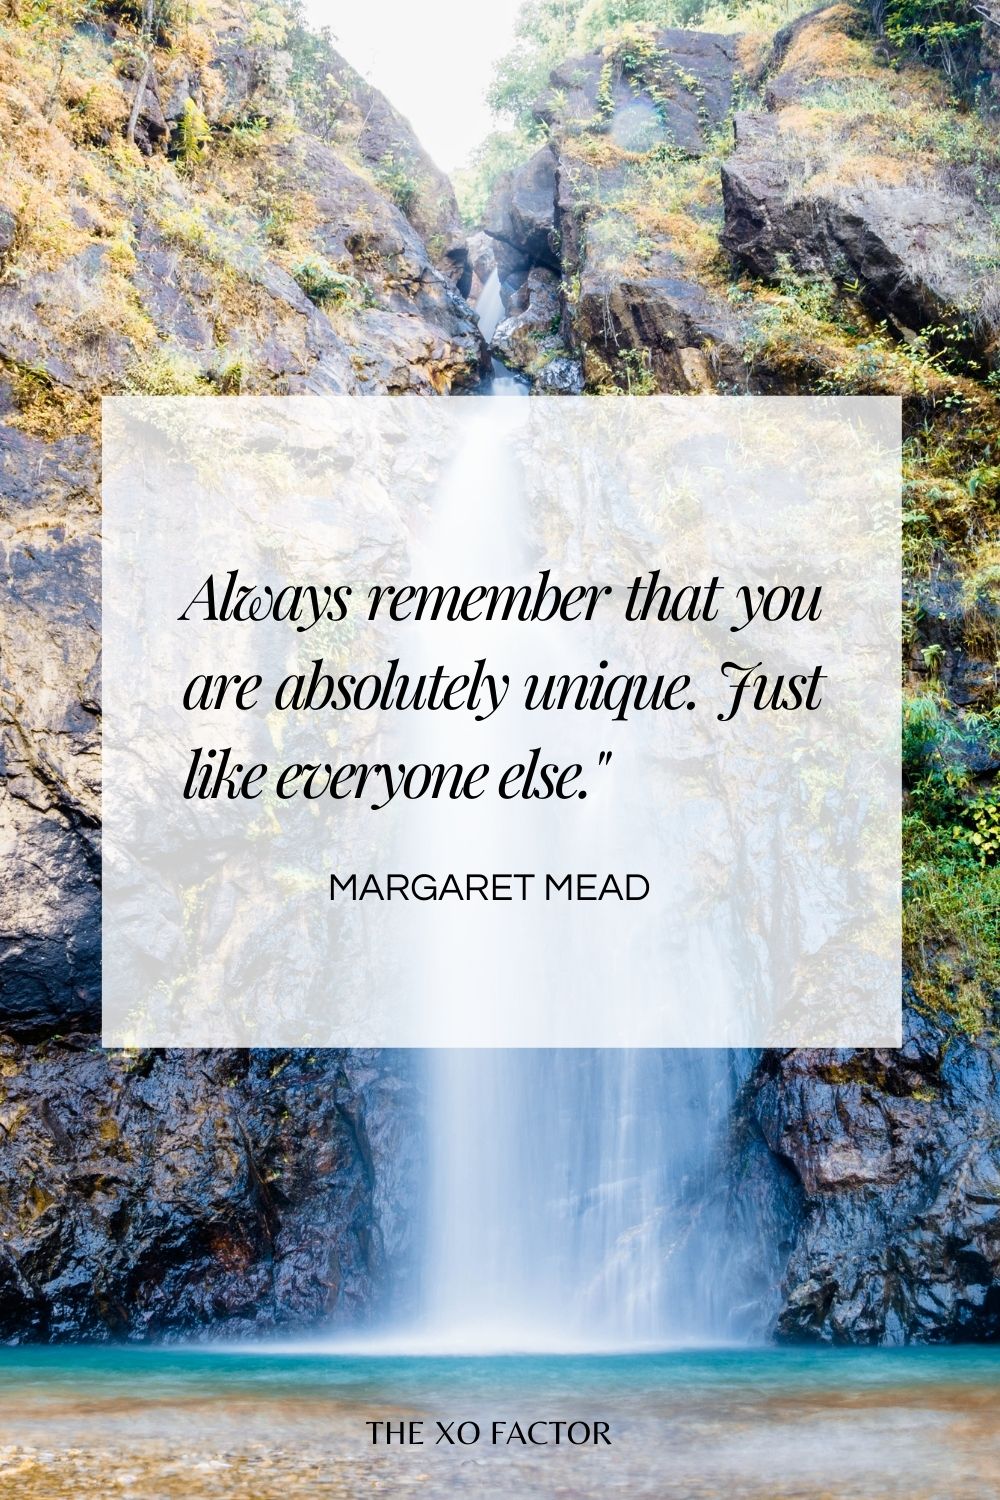 Always remember that you are absolutely unique. Just like everyone else."  Margaret Mead